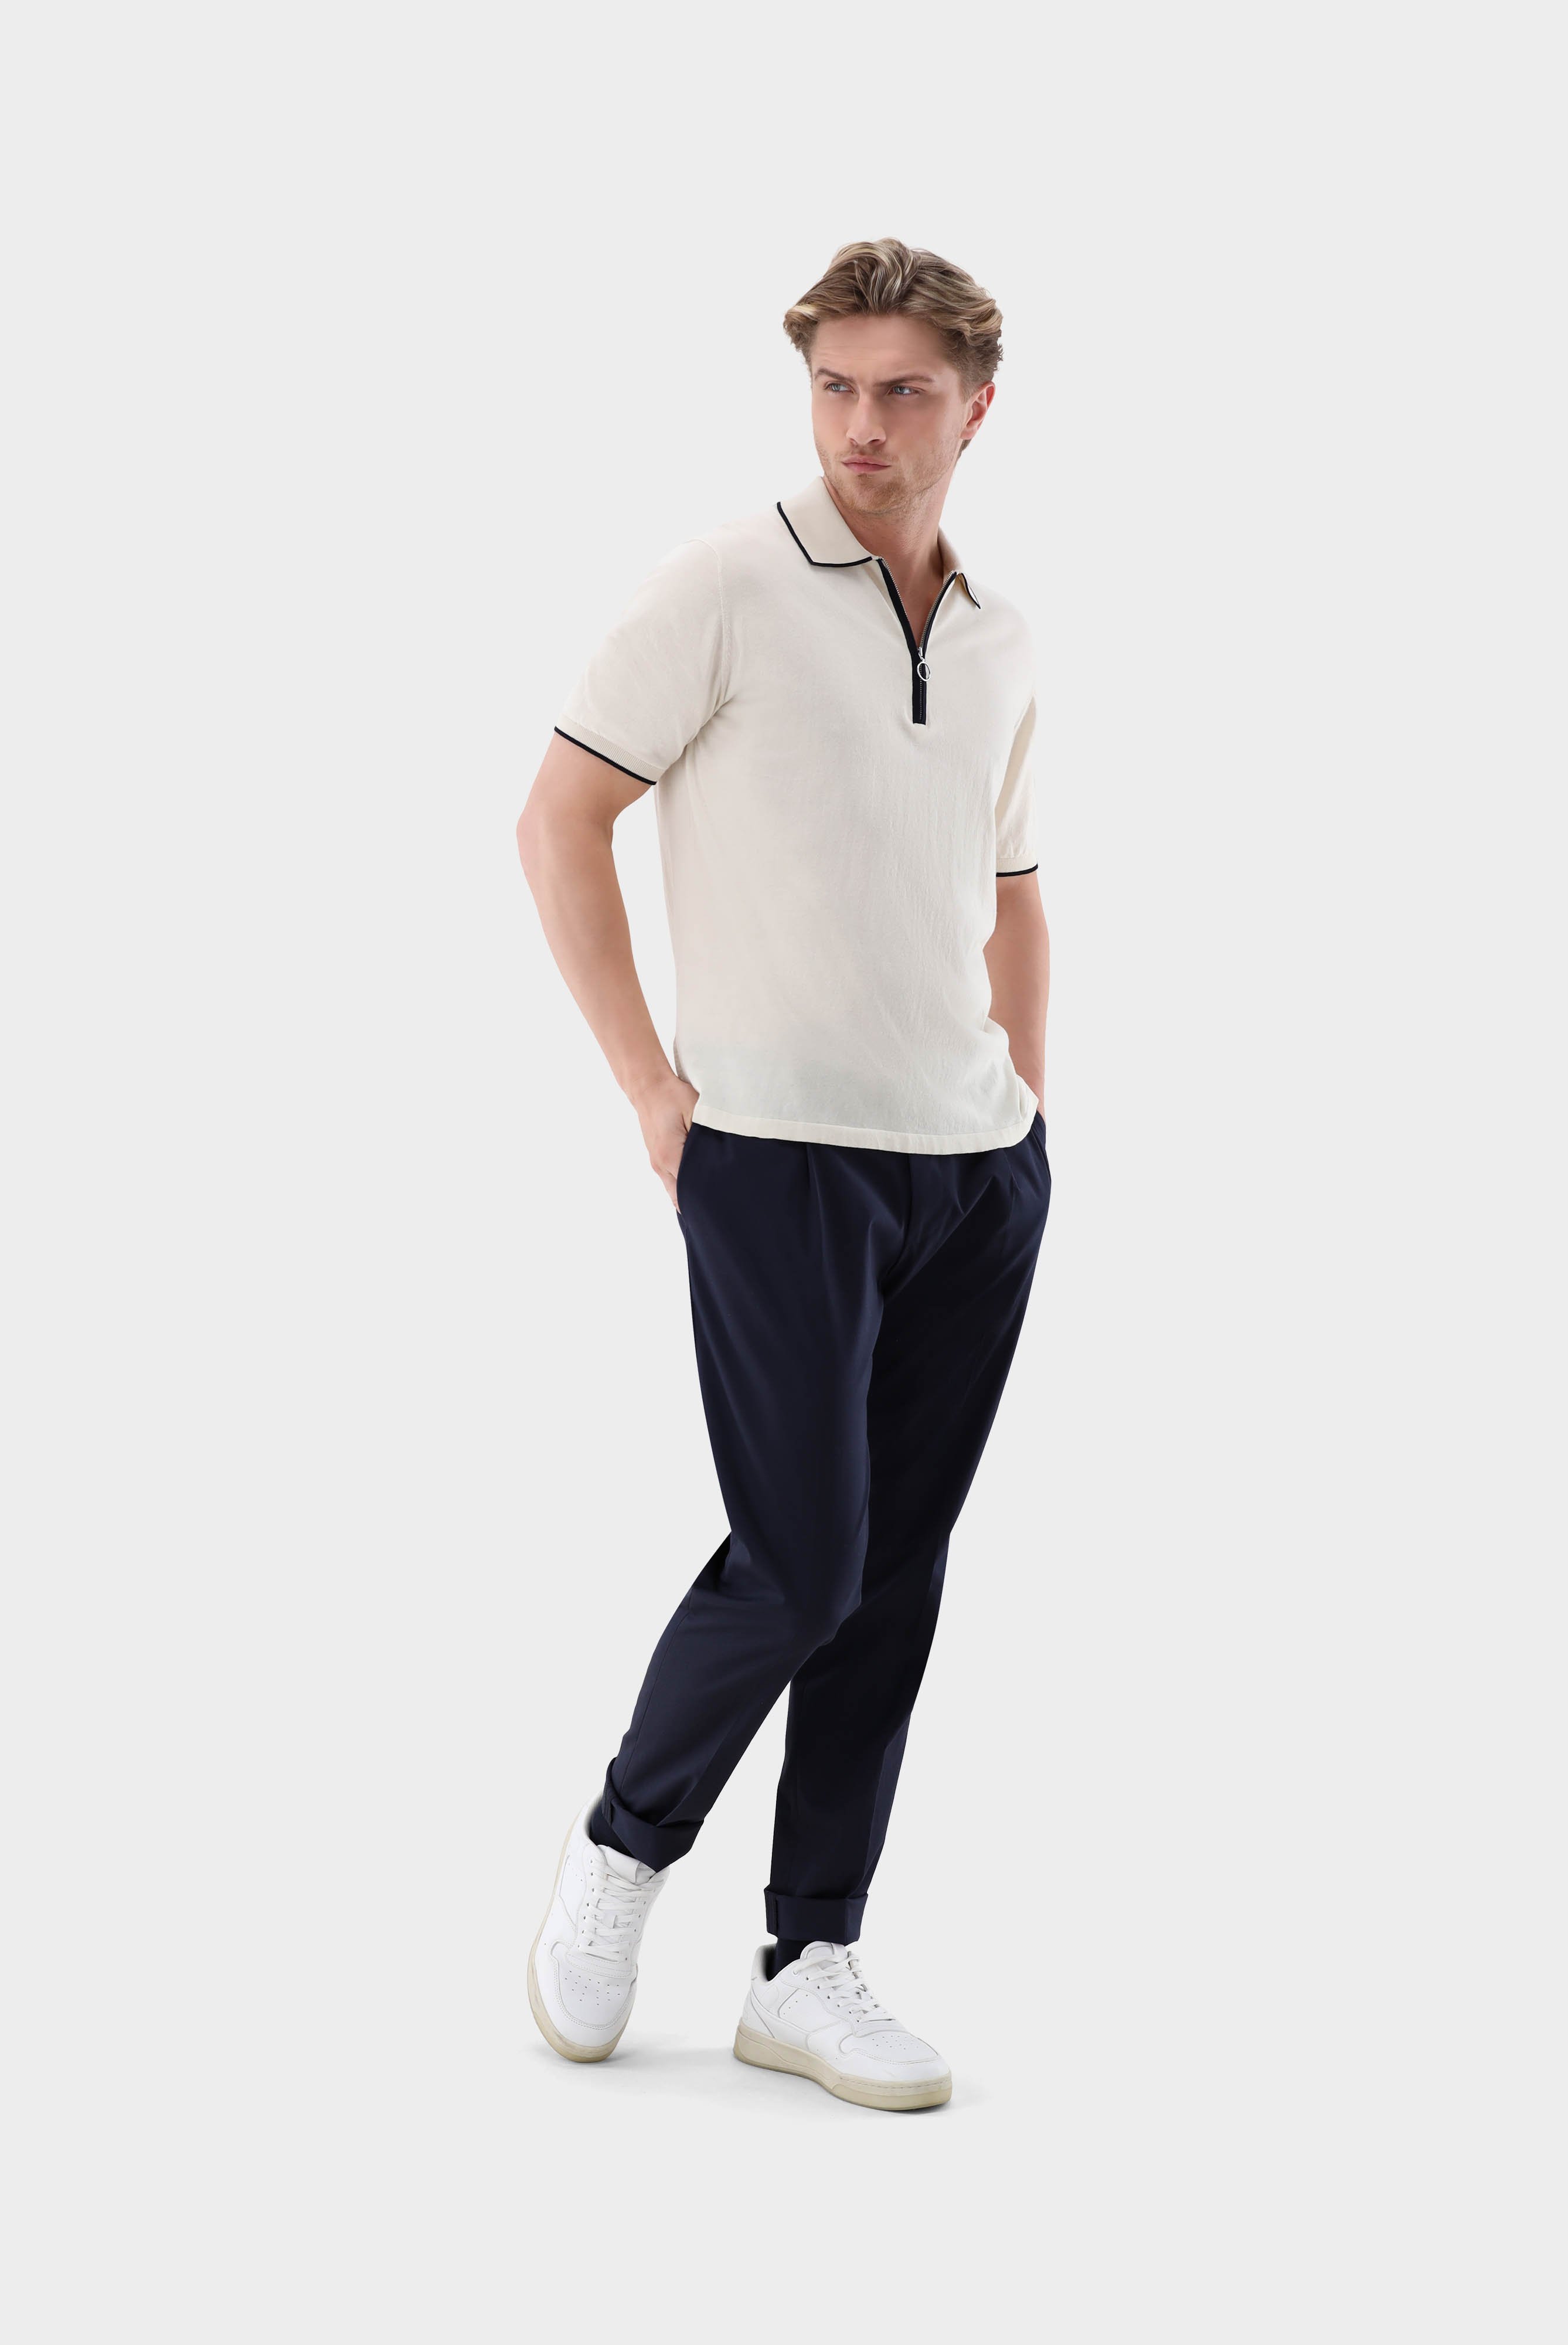 Poloshirts+Zip Knit-Polo in Air Cotton+82.8647.S7.S00174.120.S